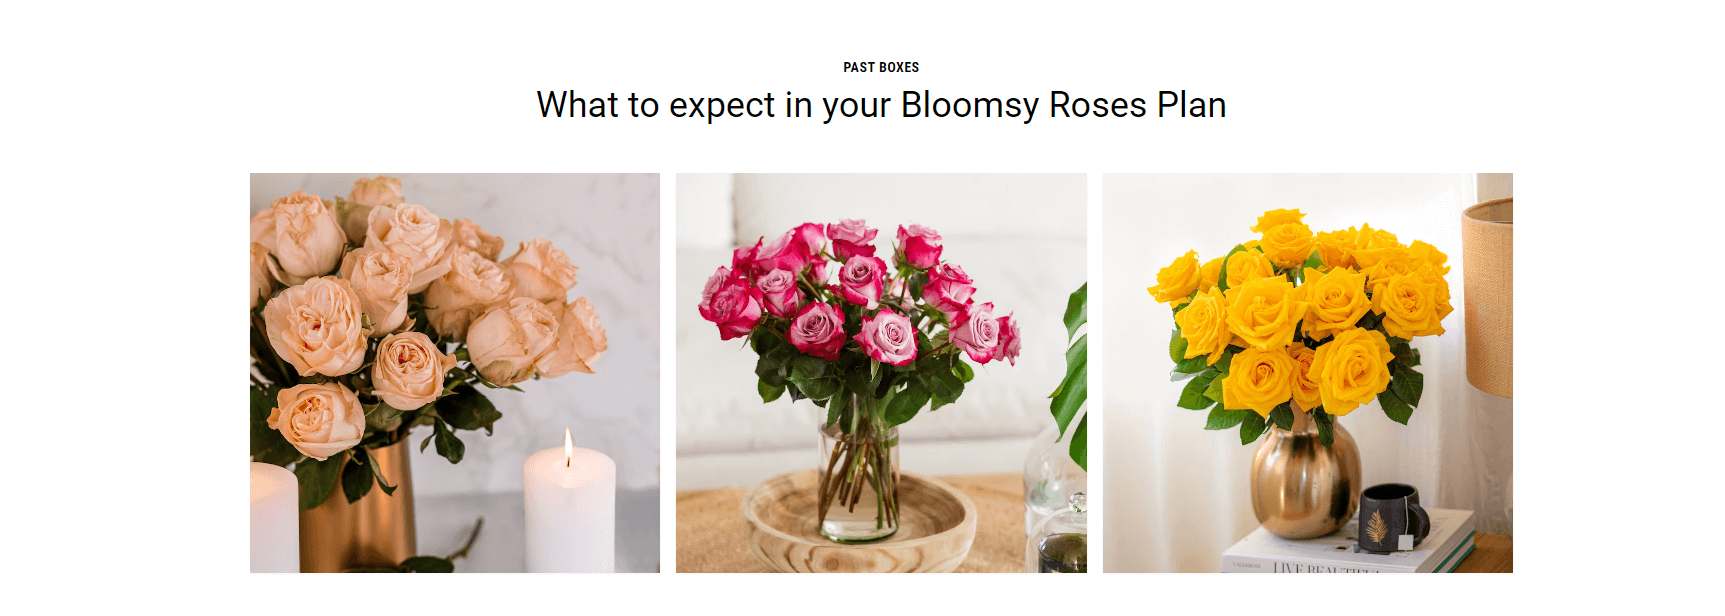 Bloomsy Roses